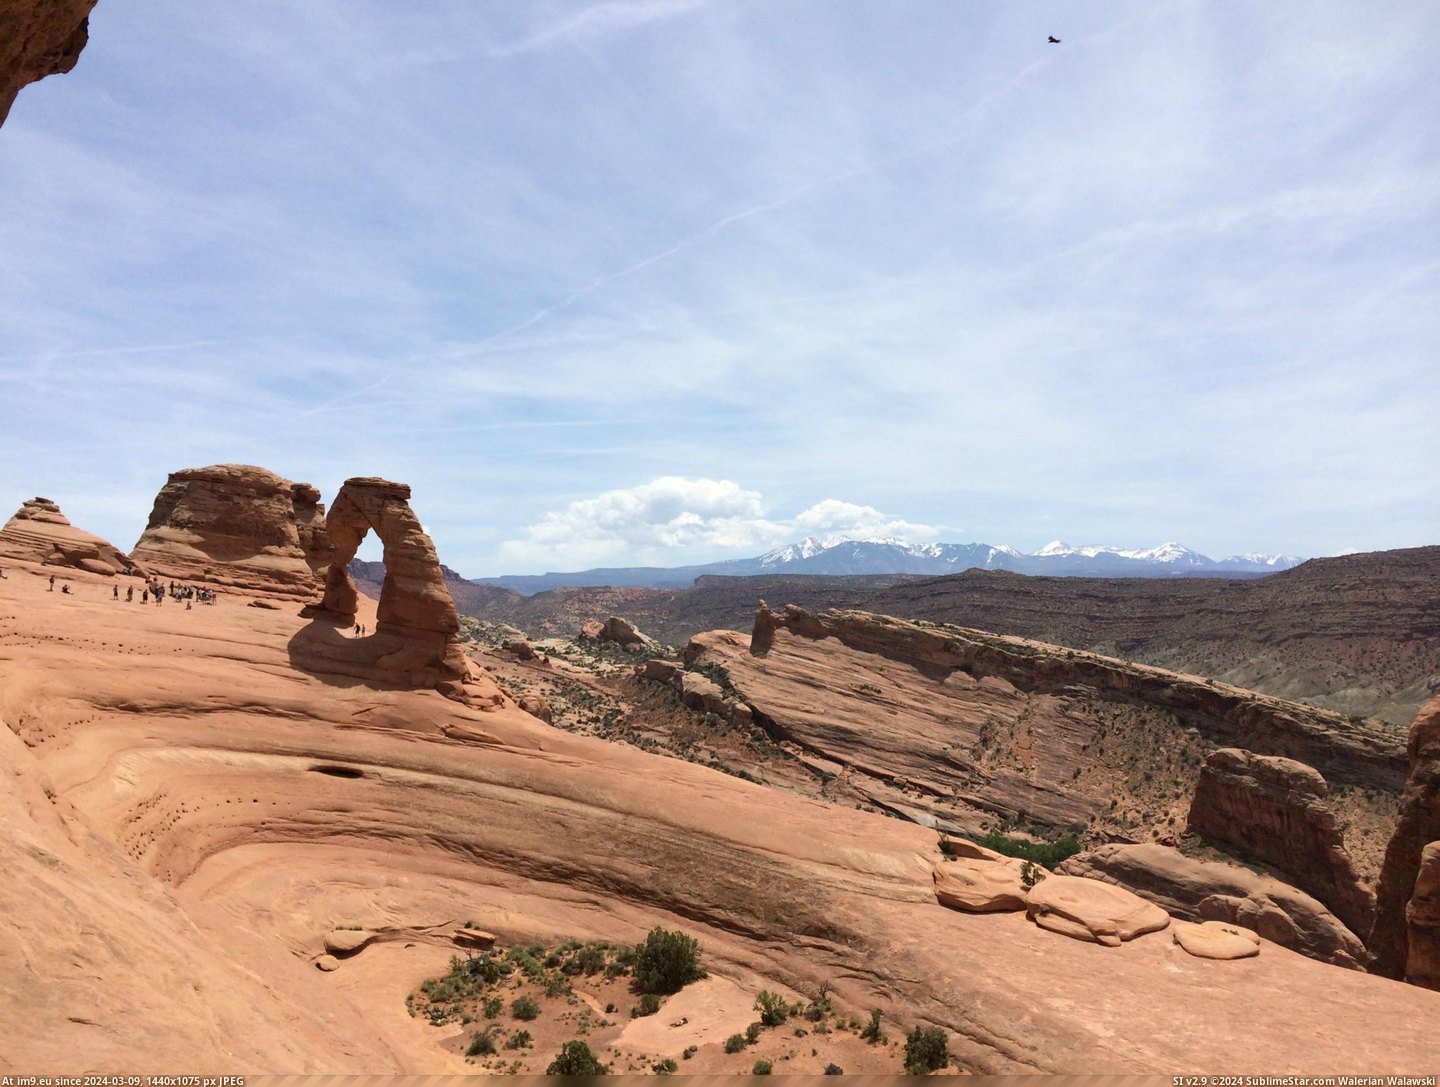 #Park #National #Arch #Delicate #Arches #3264x2448 #Utah [Earthporn] Delicate Arch in Arches National Park, Utah [3264x2448] [OC] Pic. (Изображение из альбом My r/EARTHPORN favs))